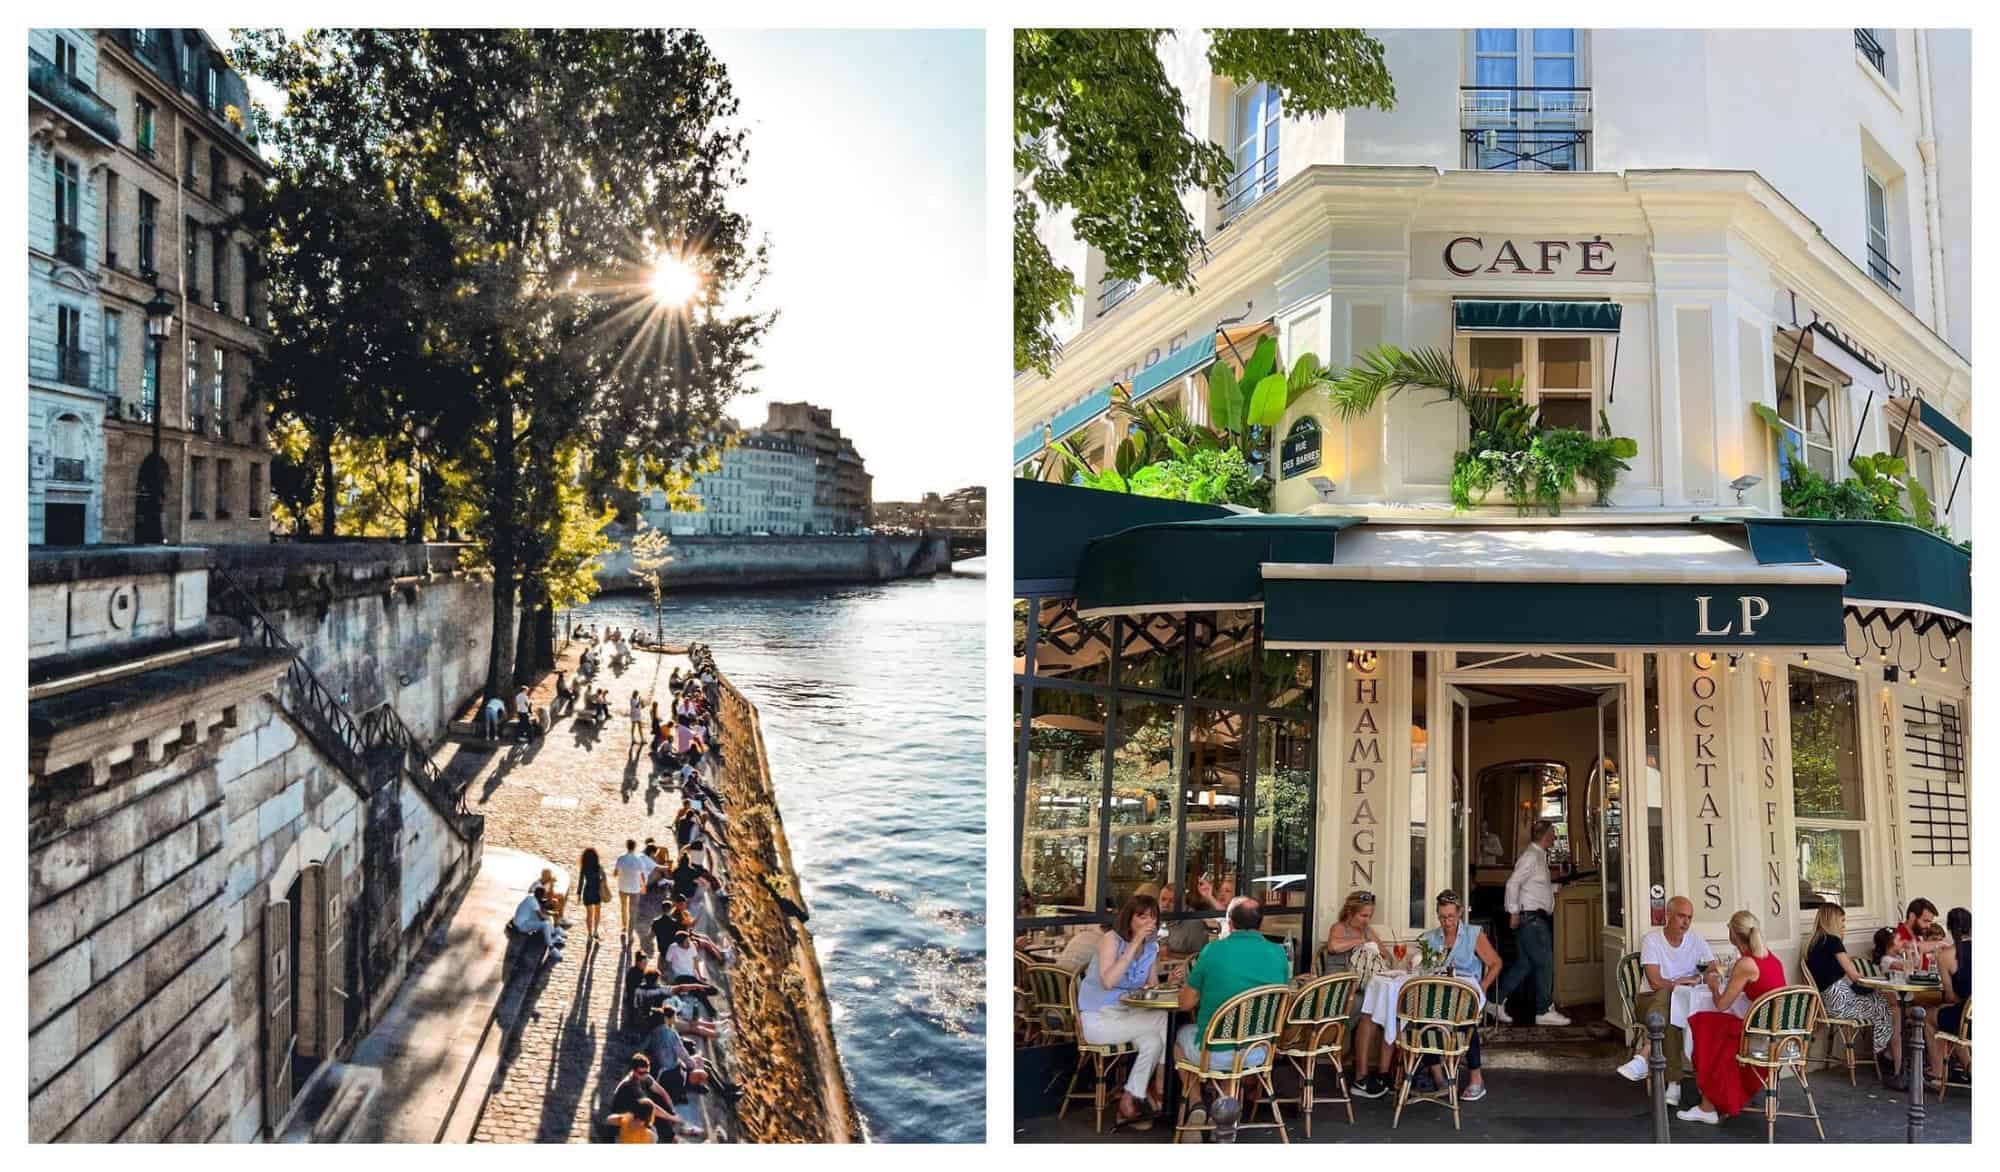 Left: Île de la Cité is filled with groups of people, and is lit up by the summer sun. Right: A traditional-looking Parisian cafe is pictured with a bustling terrace, full of people